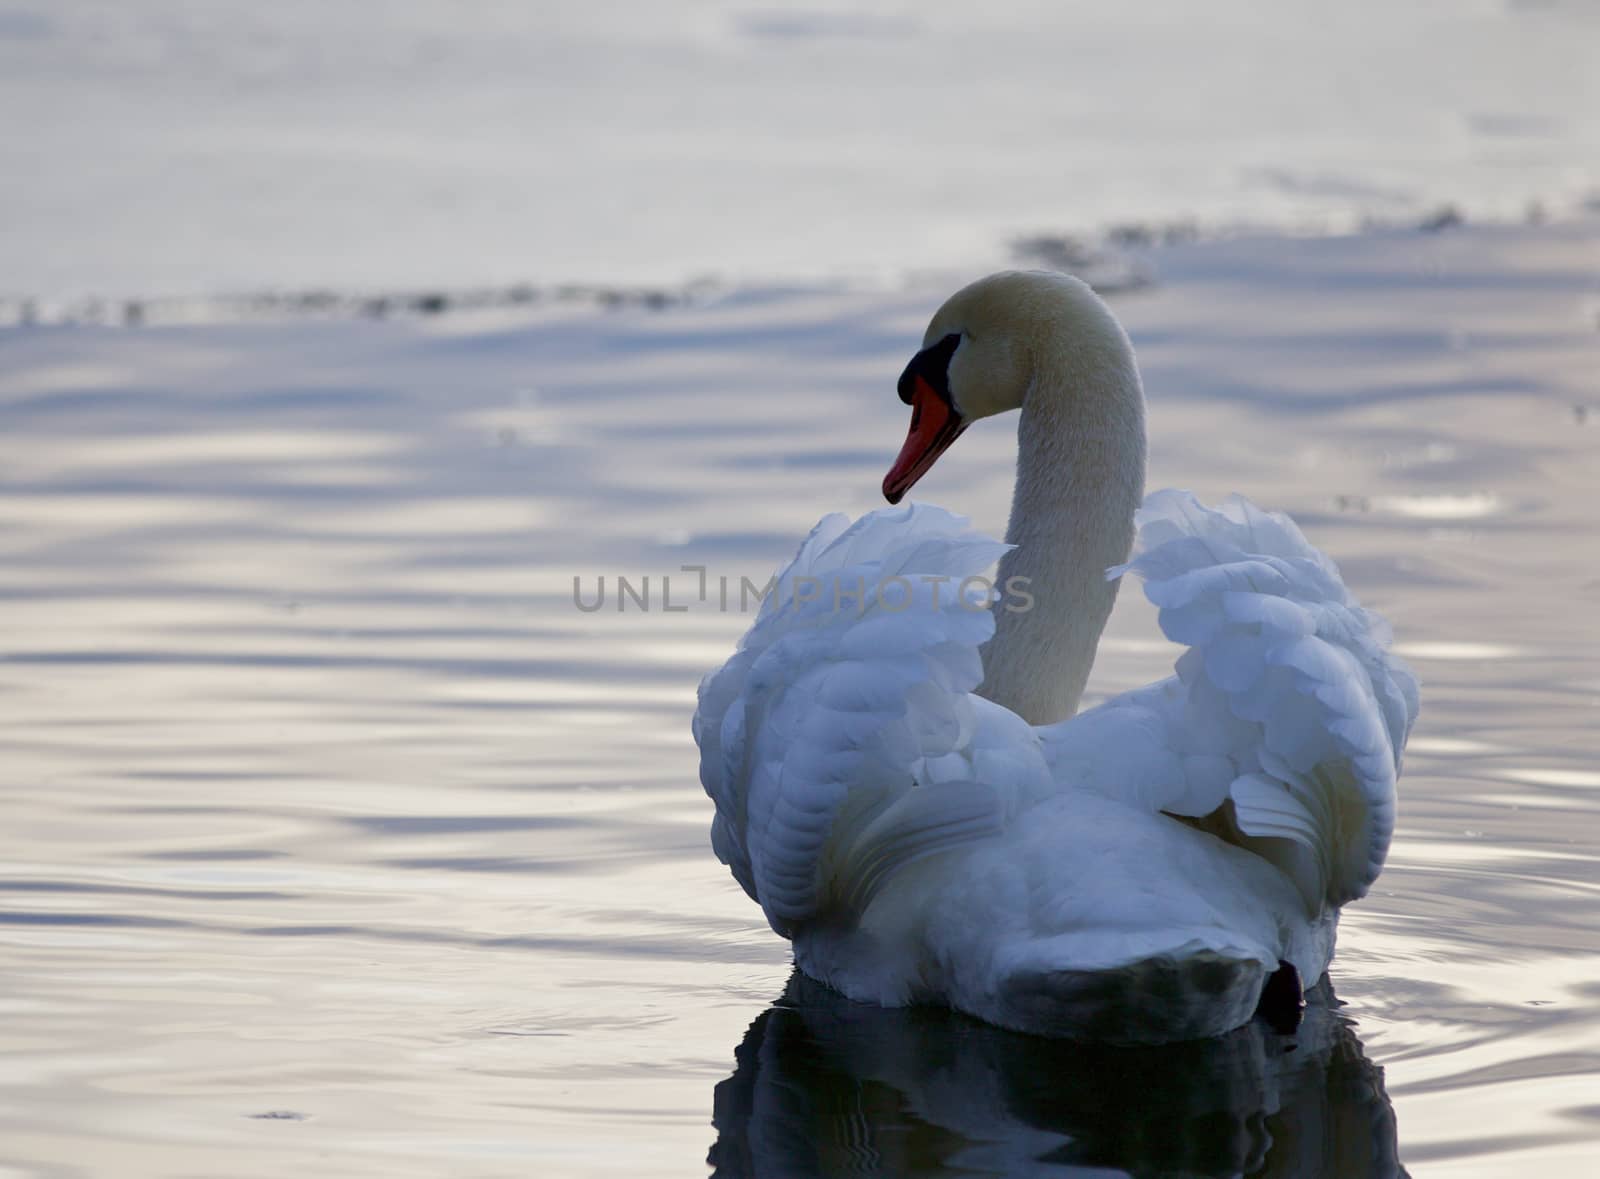 Beautiful picture with the swan in the lake by teo